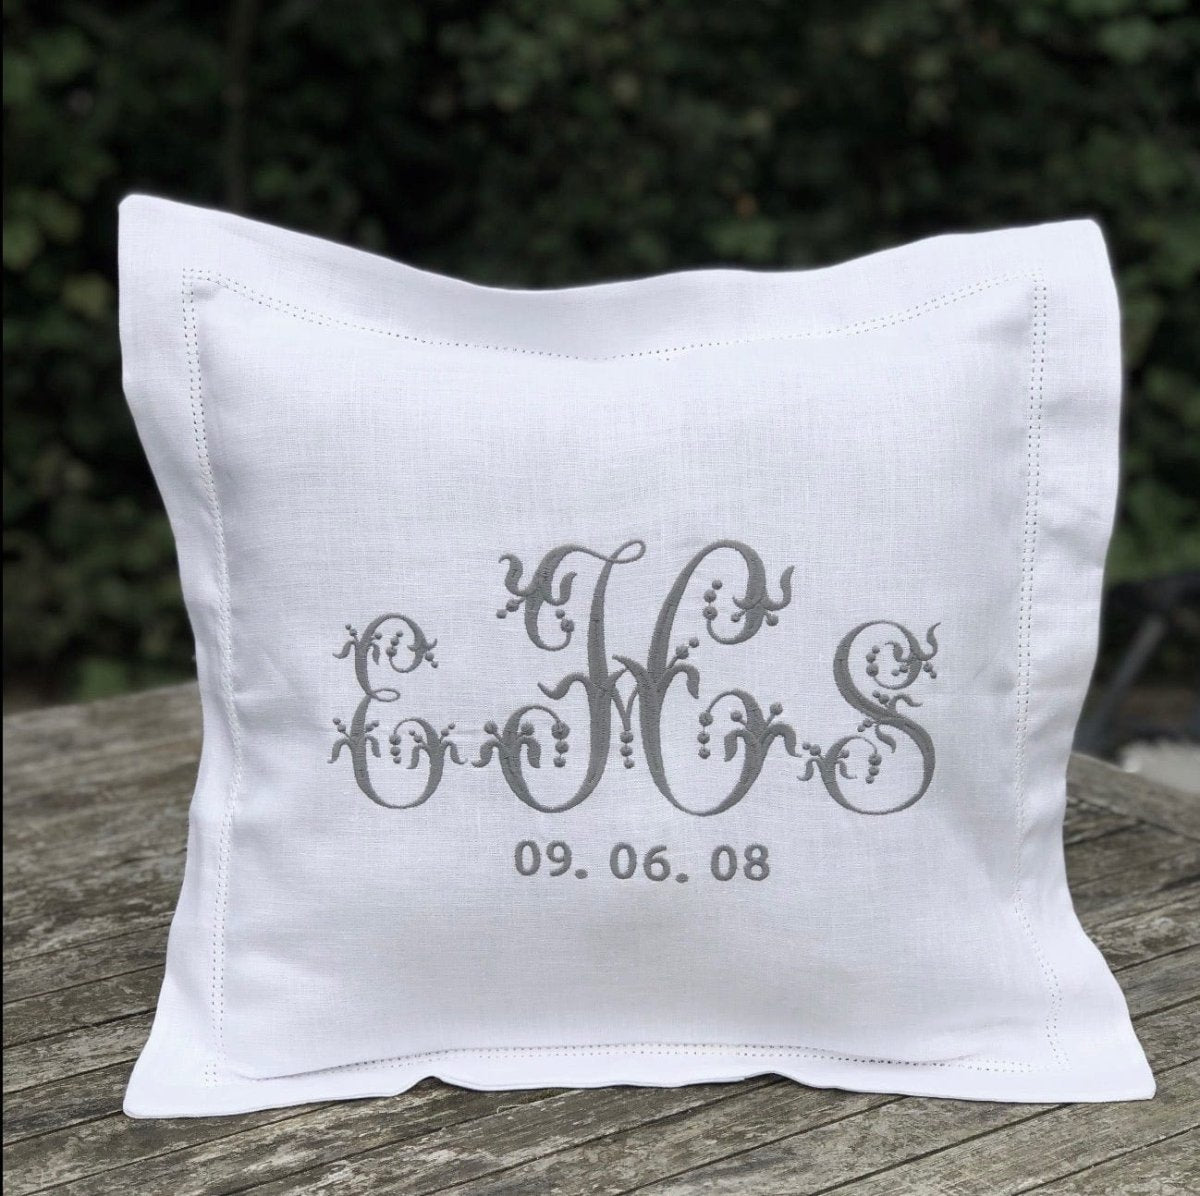 White Linen Hemstitched Embroidered Monogram Boudoir Cushion Cover - Linen and Letters